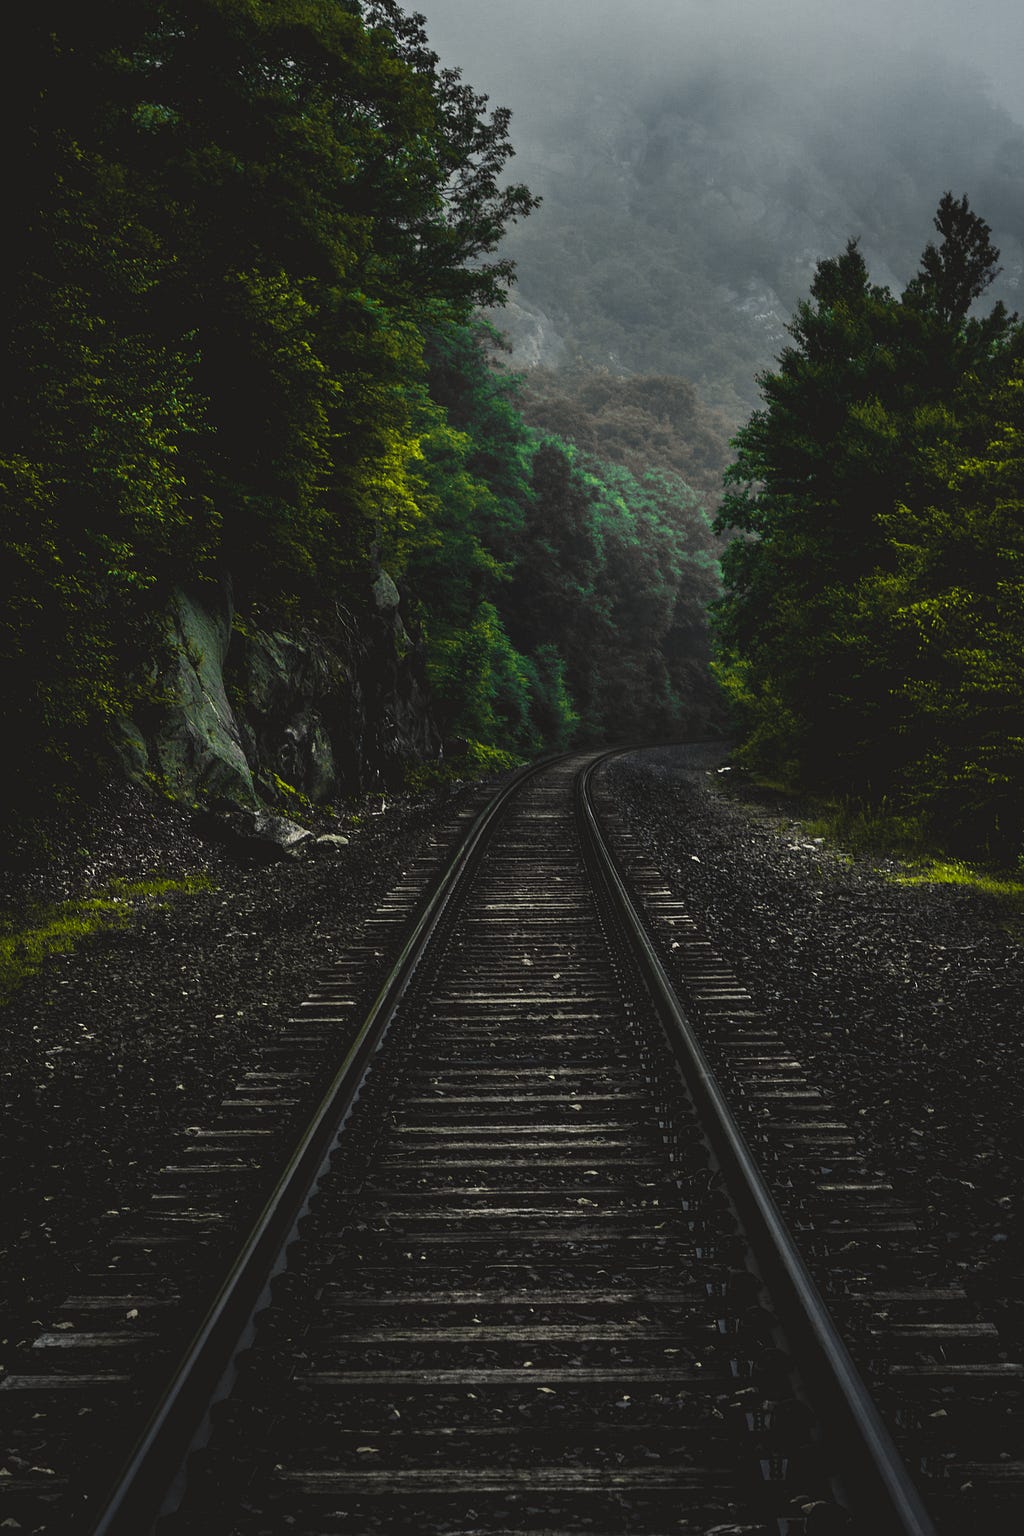 Stunning image of train tracks around dusk surrounded by luscious greenery on either side